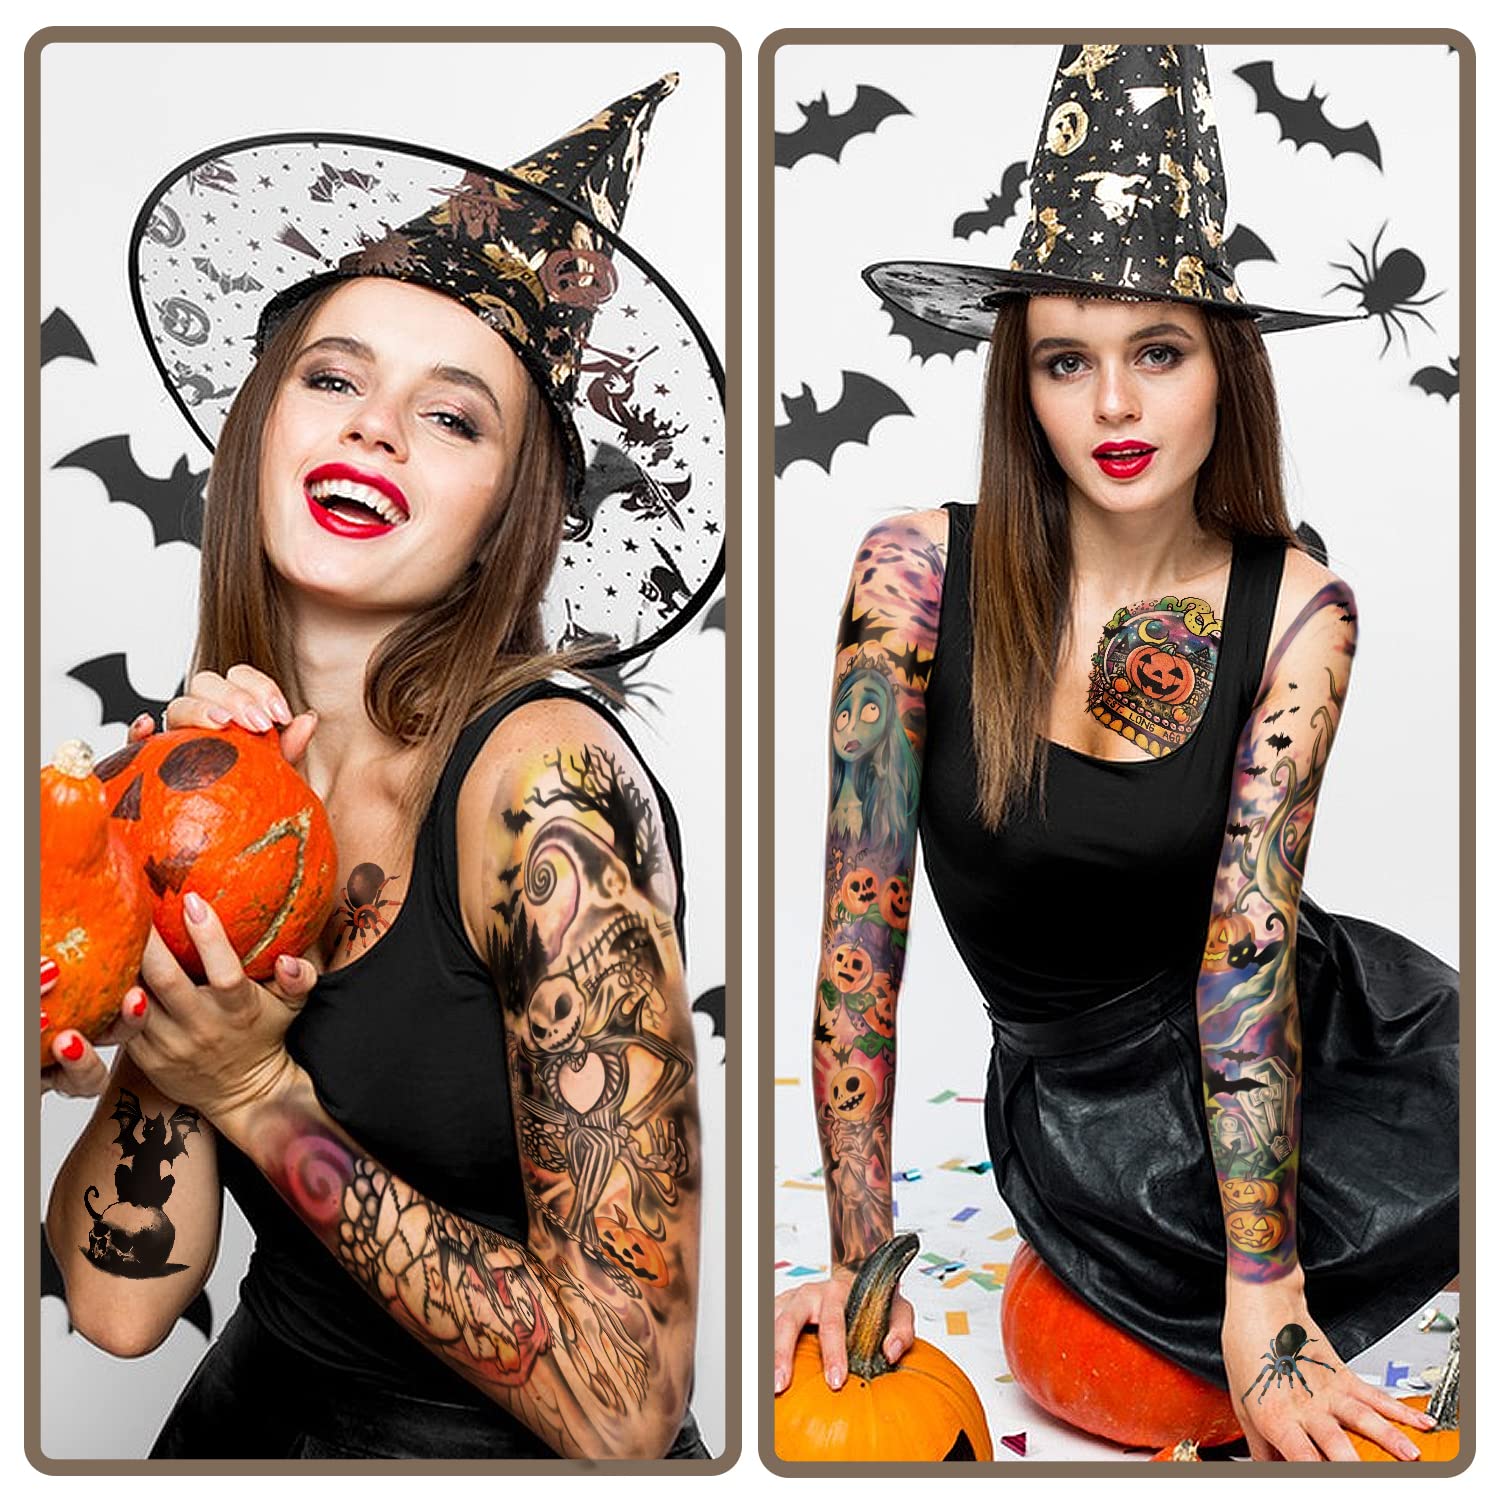 Yazhiji 44 Sheets Halloween Full Arm Temporary Tattoos Pumpkin Witch Sugar Skull Tattoo for Women Men Boys and Girls Zombie Make up Kit, Scar Waterproof Tattoos for Parties